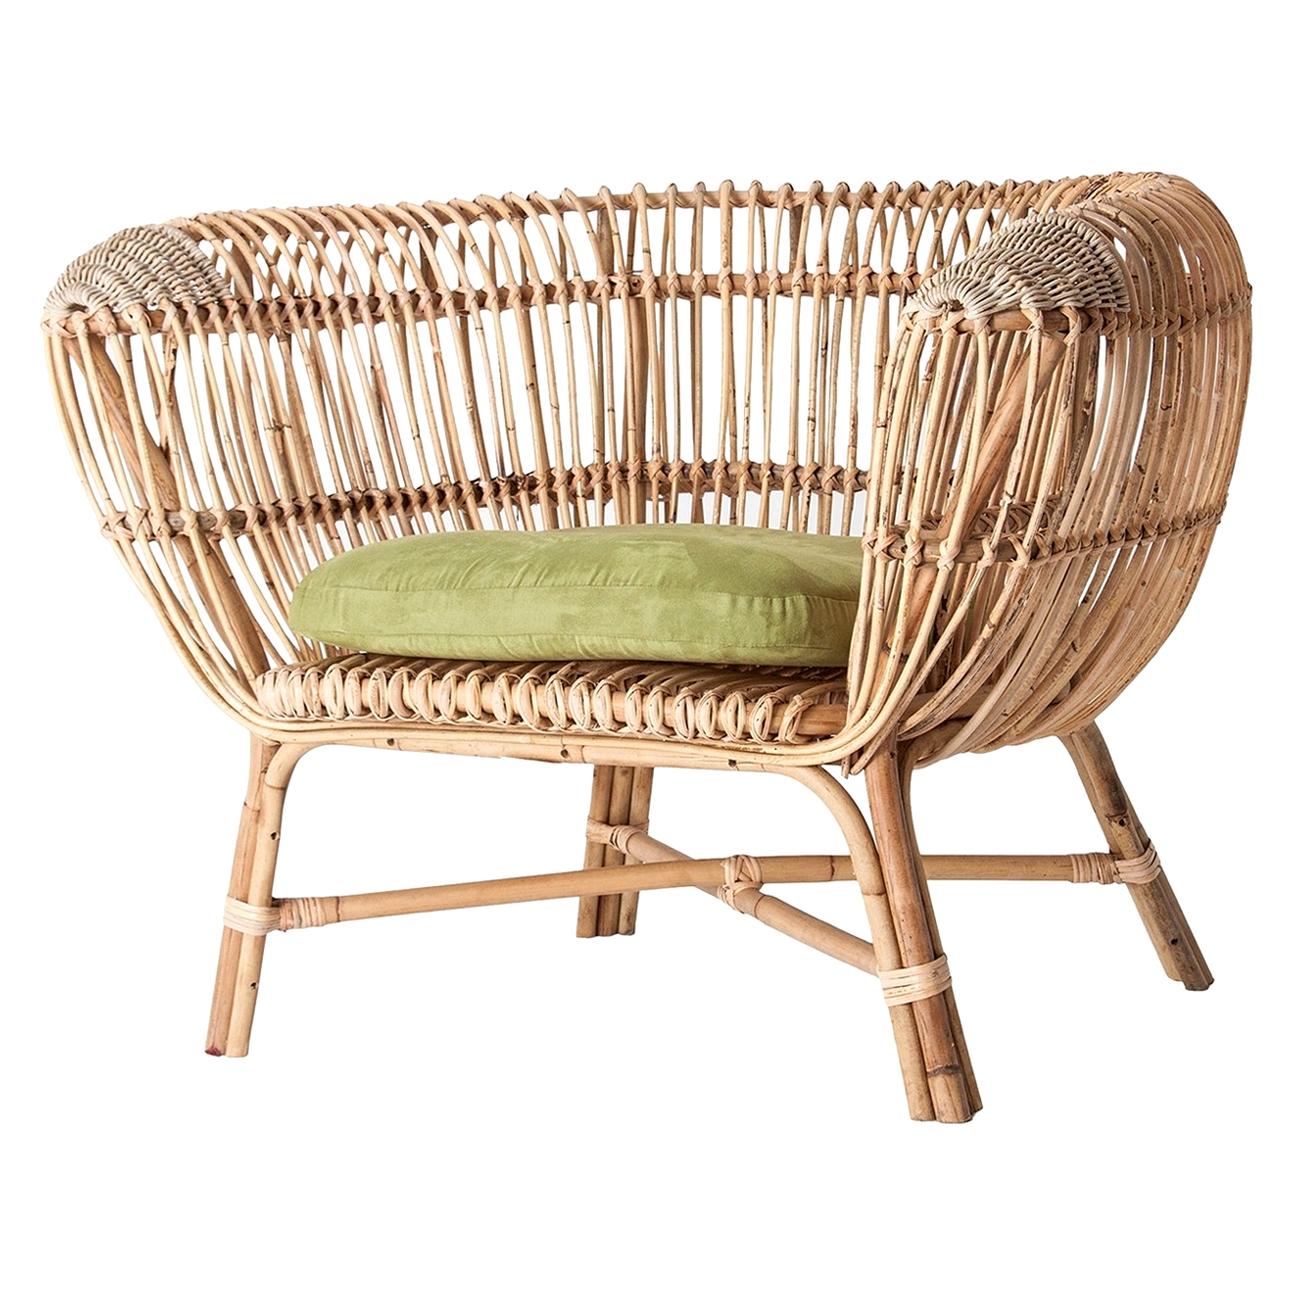 Italian and Midcentury Design Style Rattan and Wicker Armchair